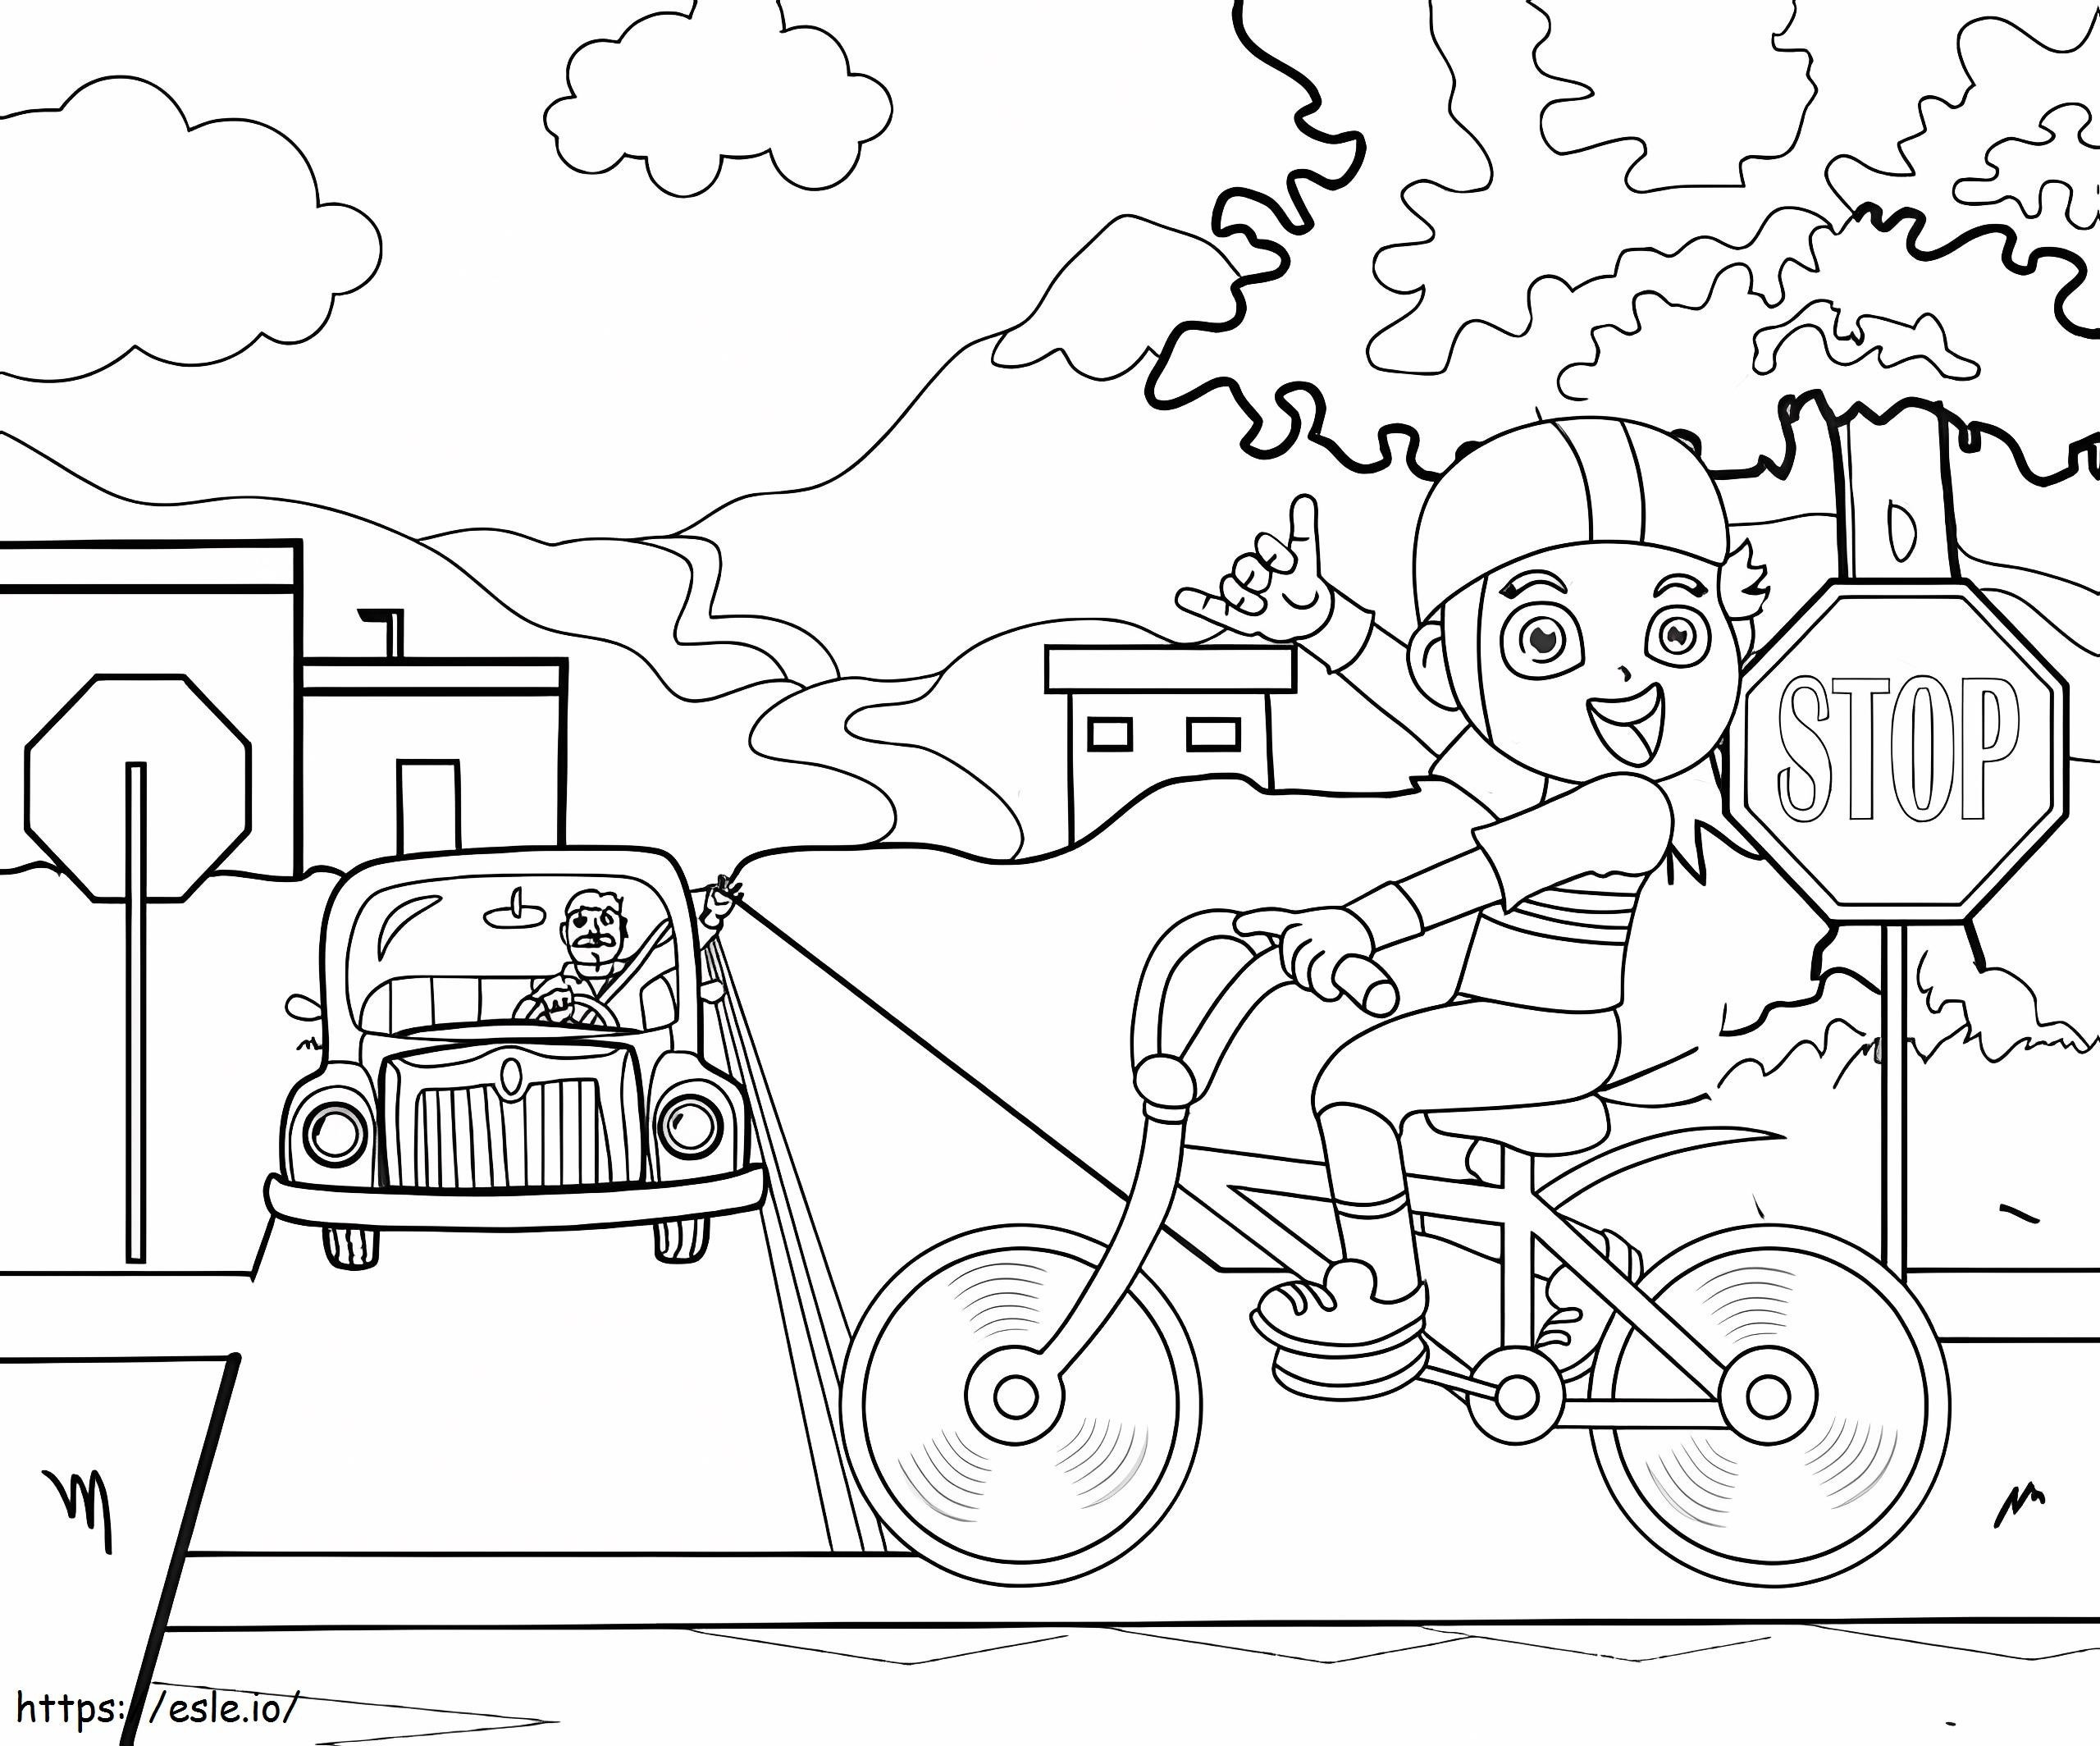 Street Safety coloring page